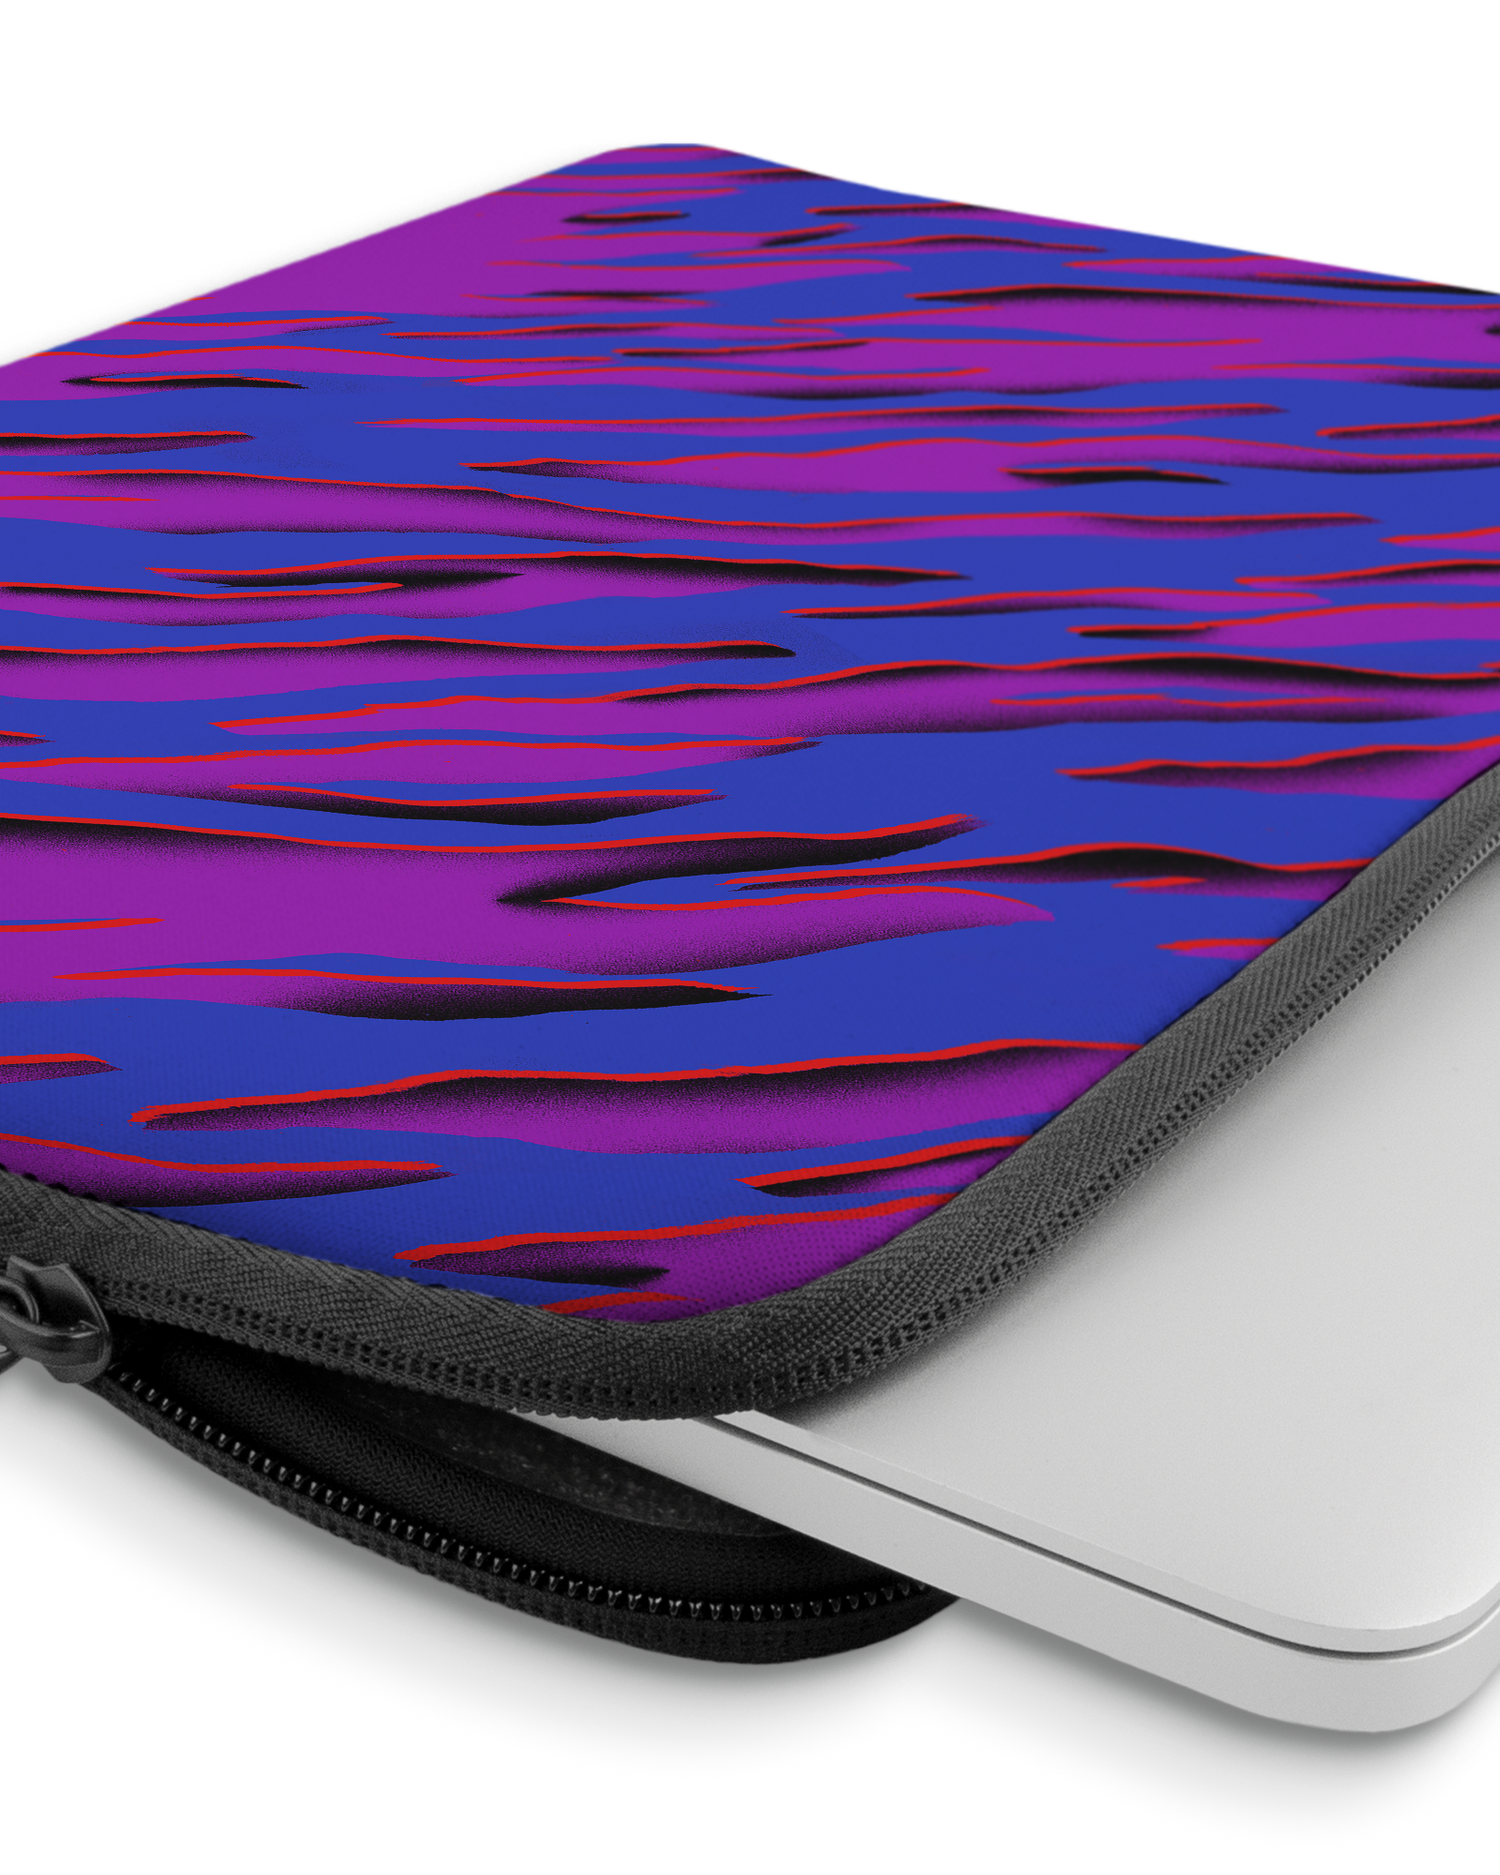 Electric Ocean 2 Laptop Case 13-14 inch with device inside